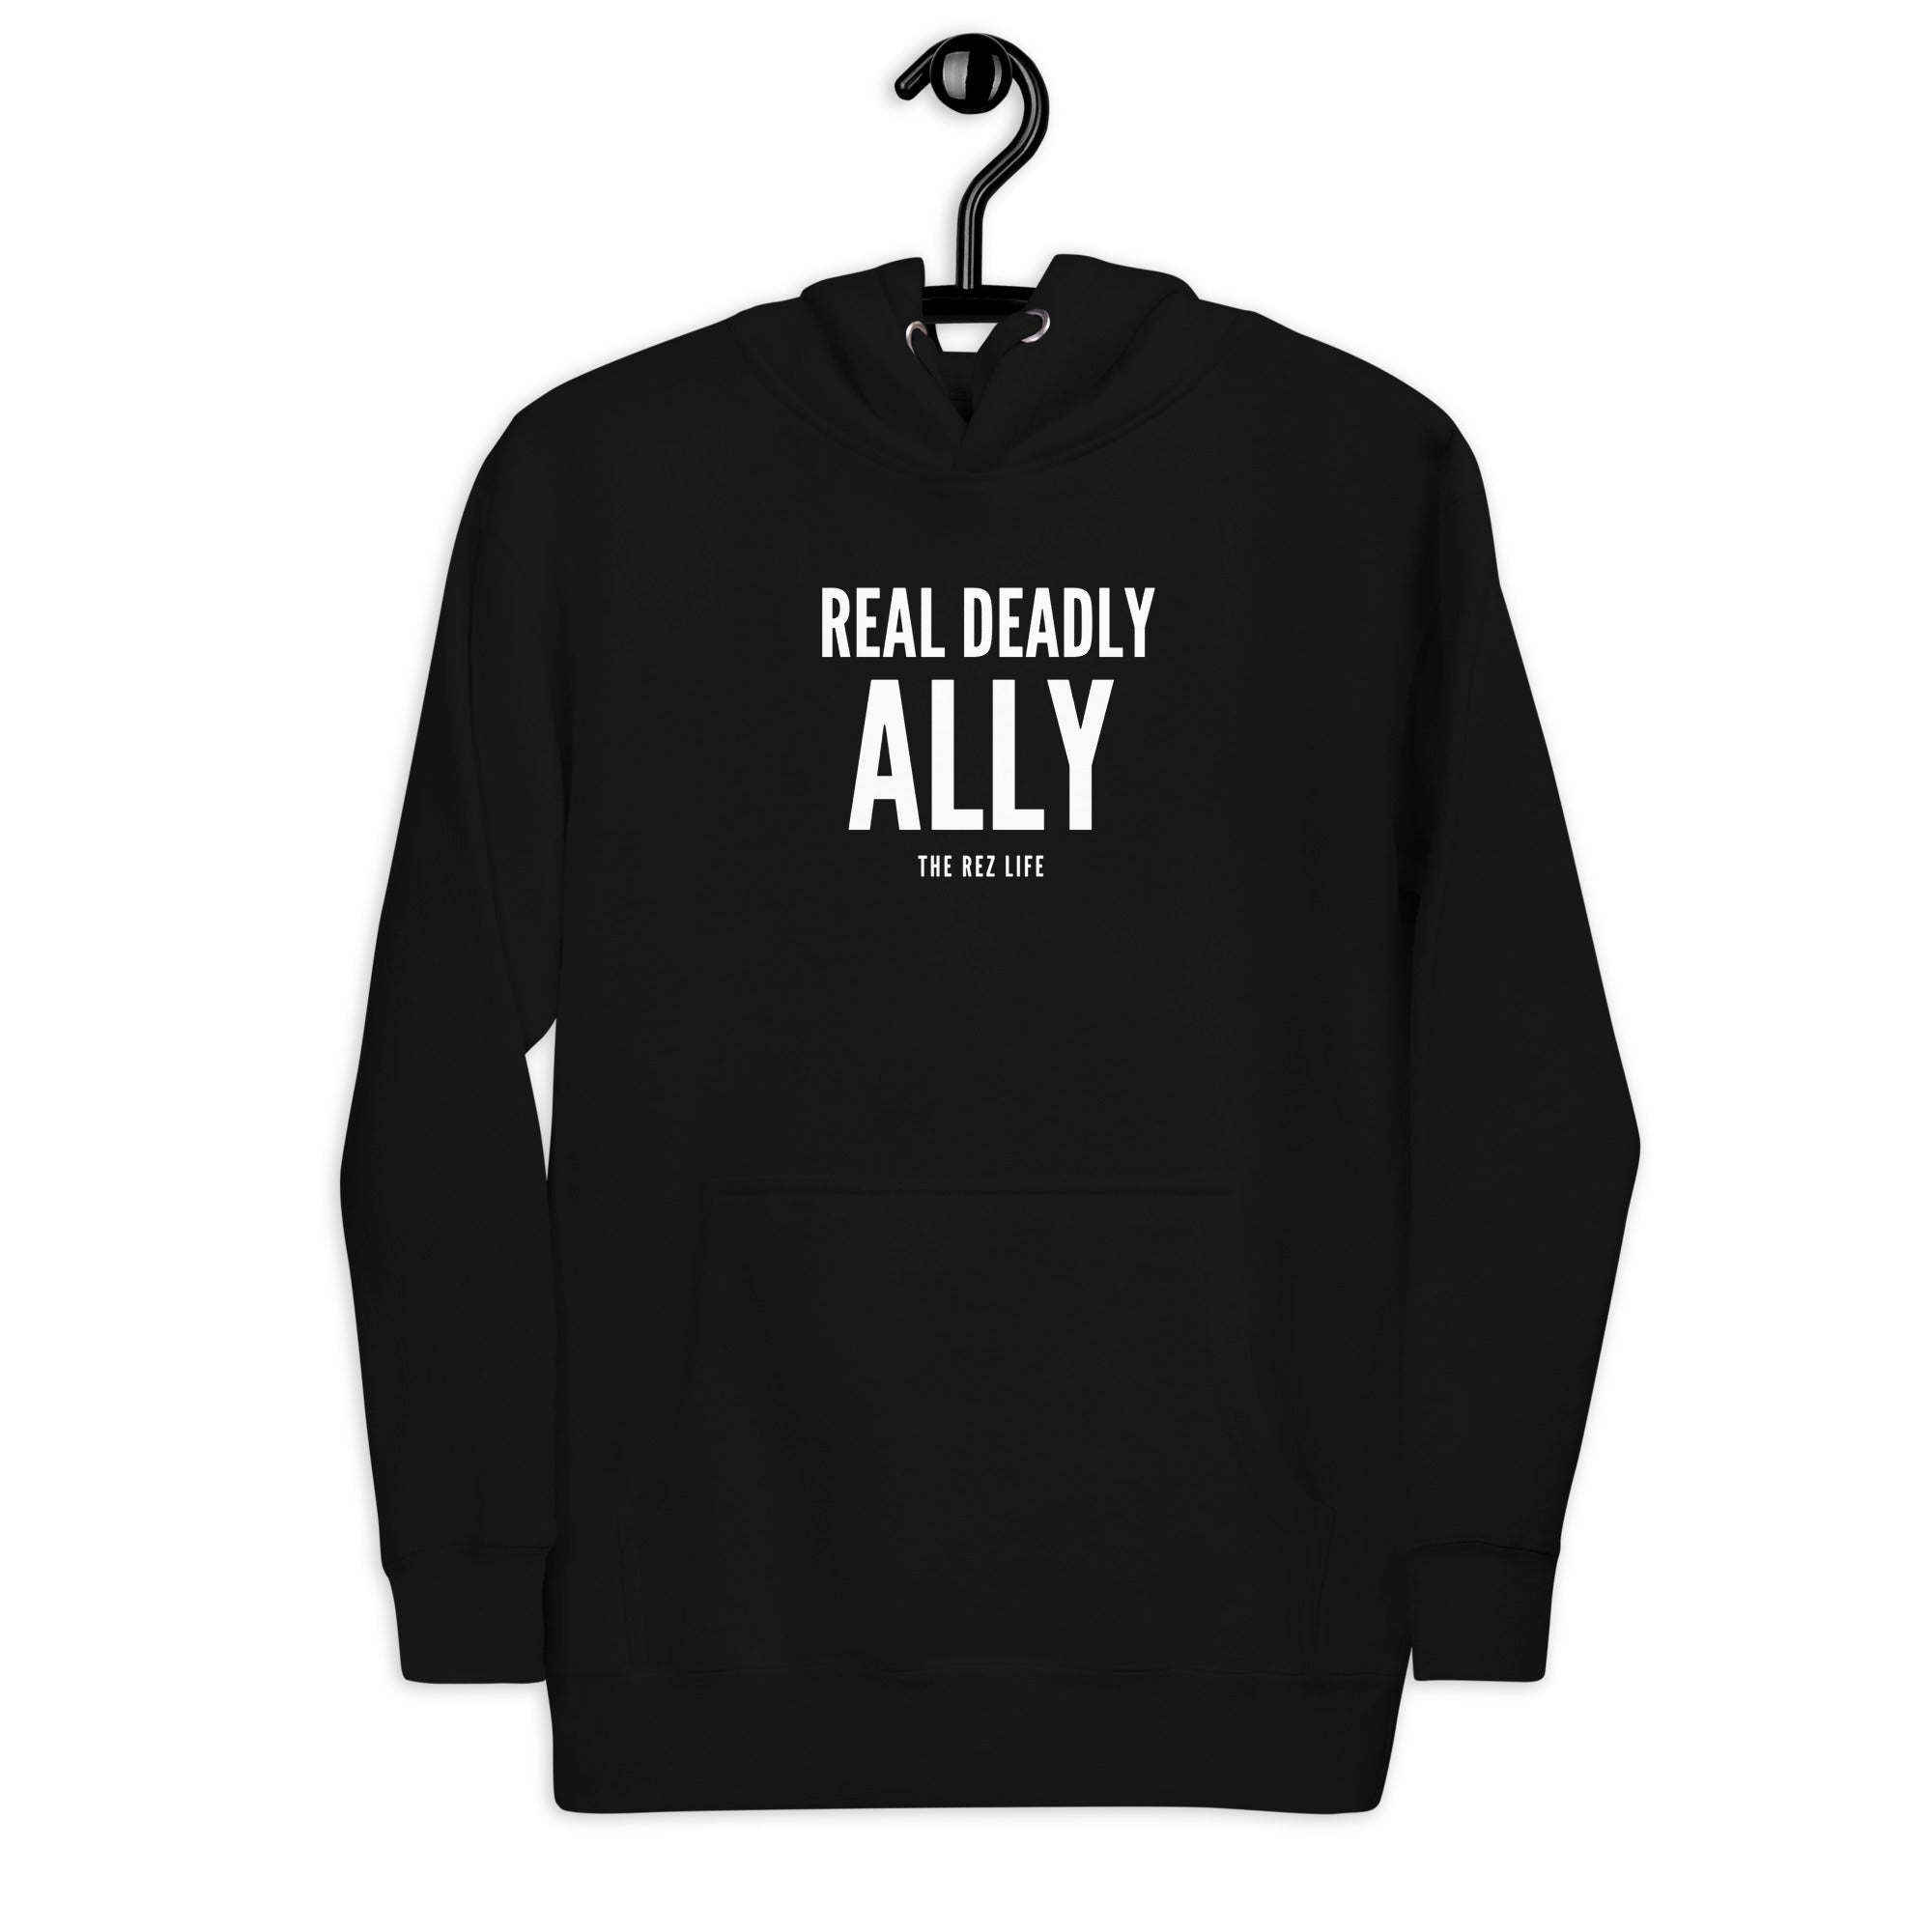 You Know Who You Are - A Real Deadly ALLY! Hoodie